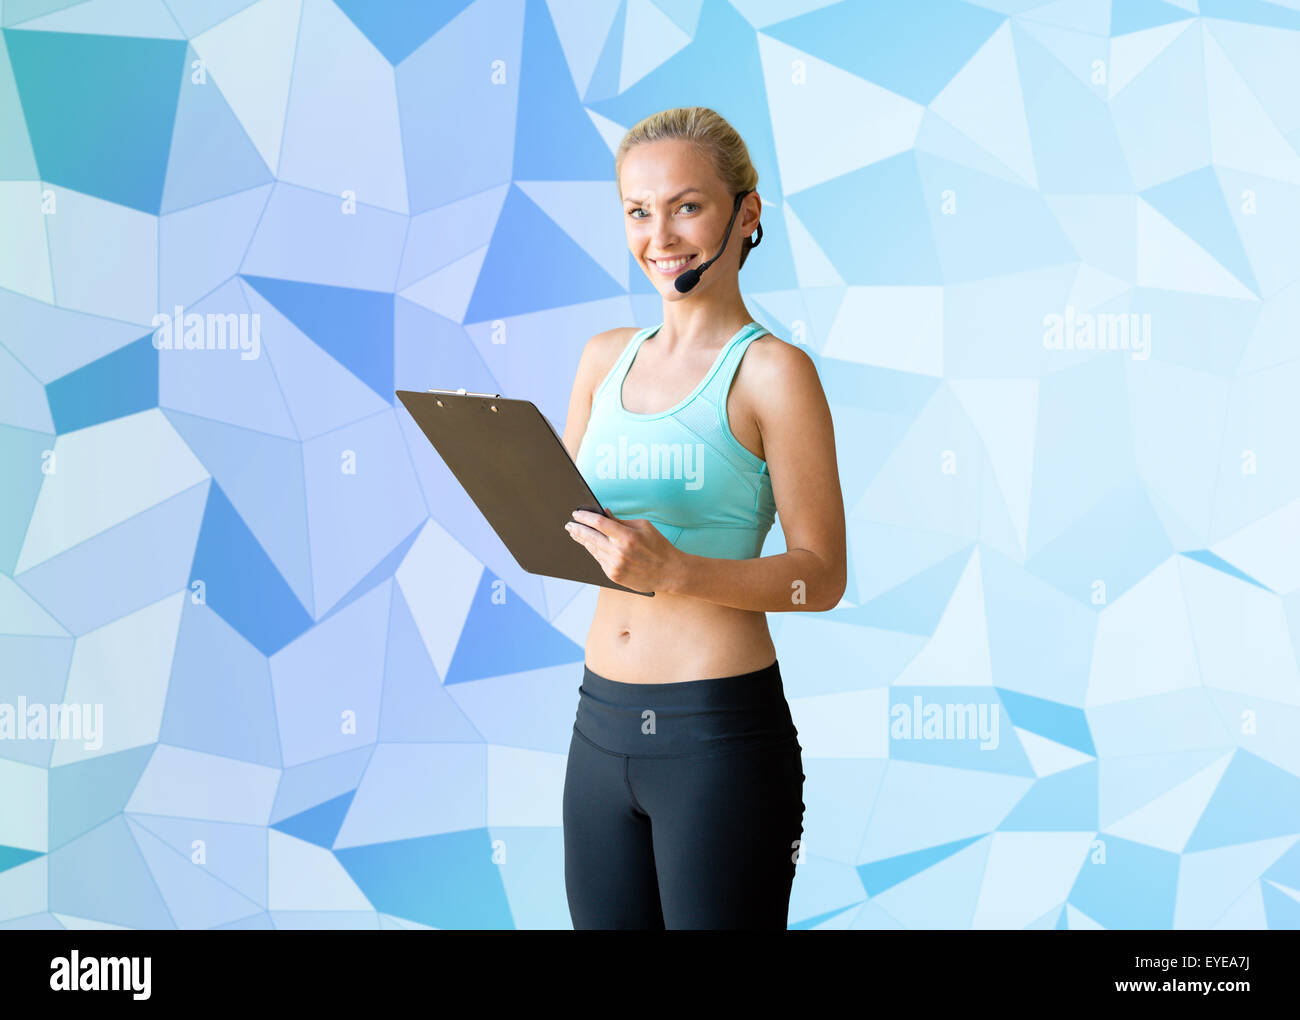 happy woman trainer with microphone and clipboard Stock Photo